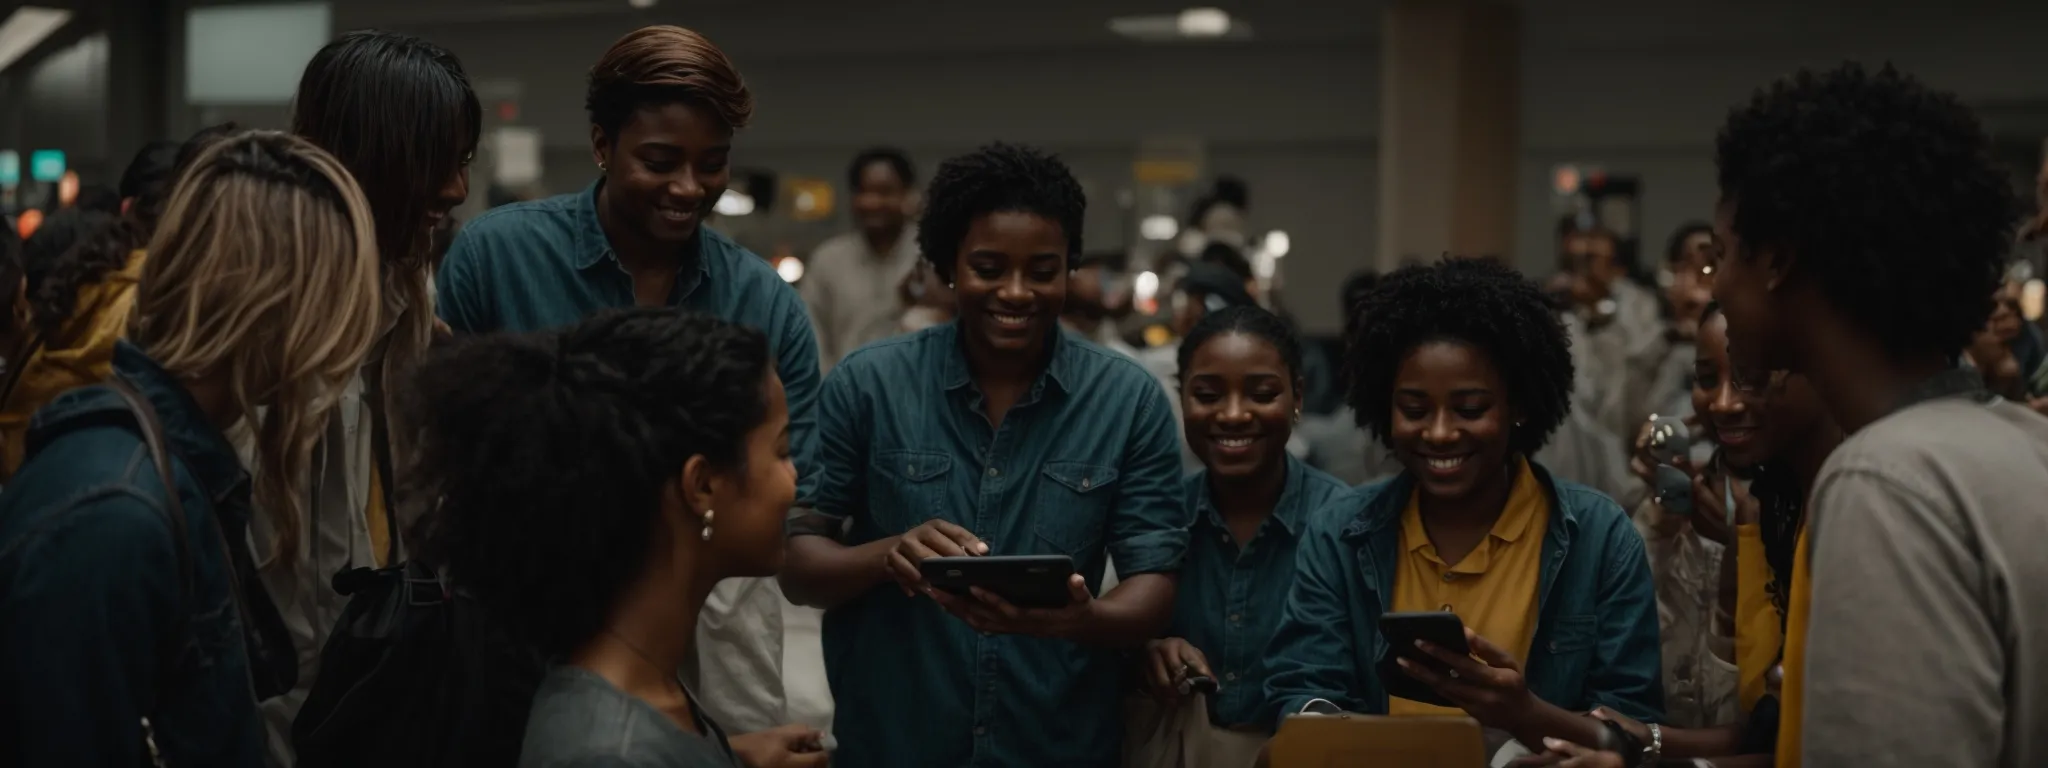 a diverse group of people surrounding a digital device, smiling and interacting with an online platform.